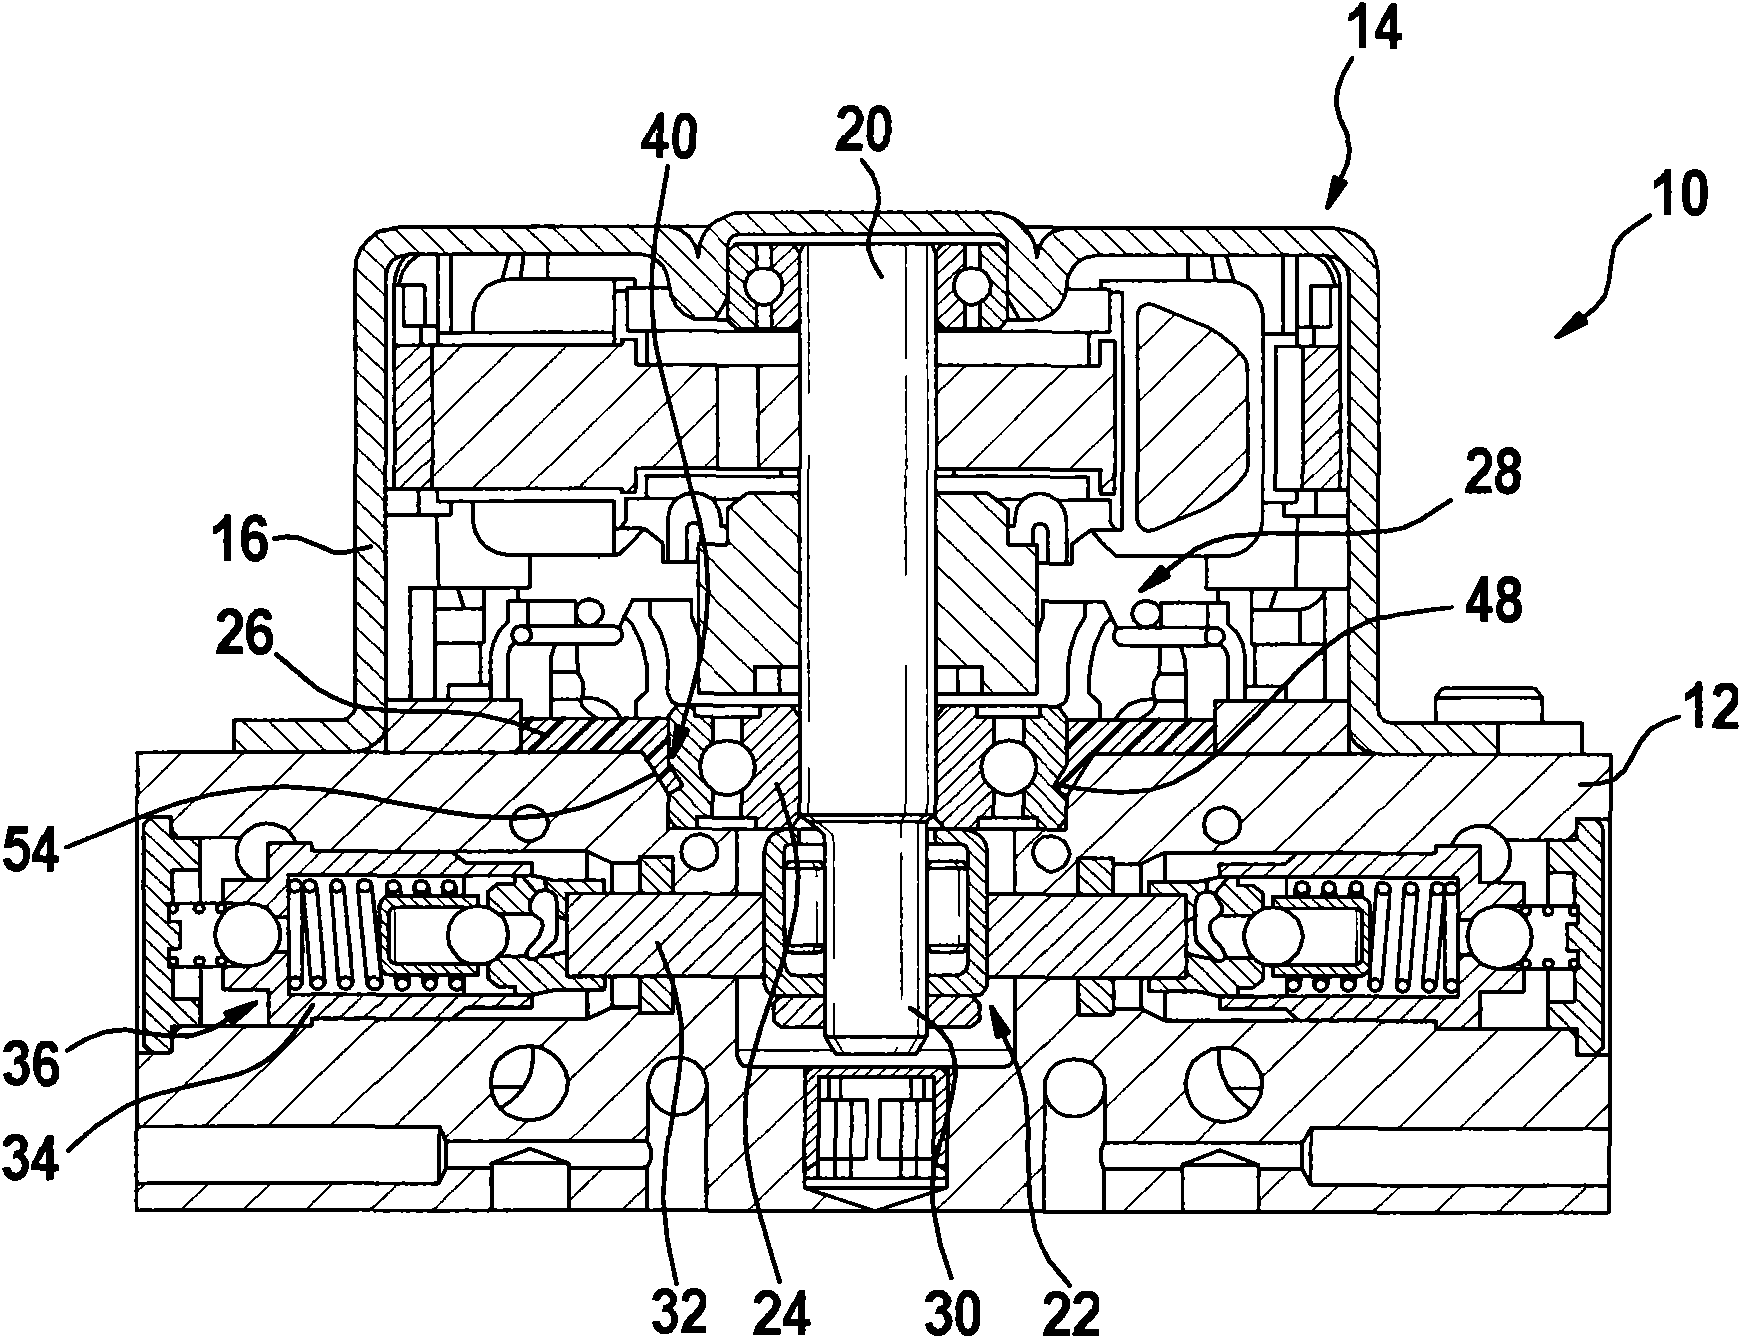 Hydraulic unit for vehicle brake system with motor bearing